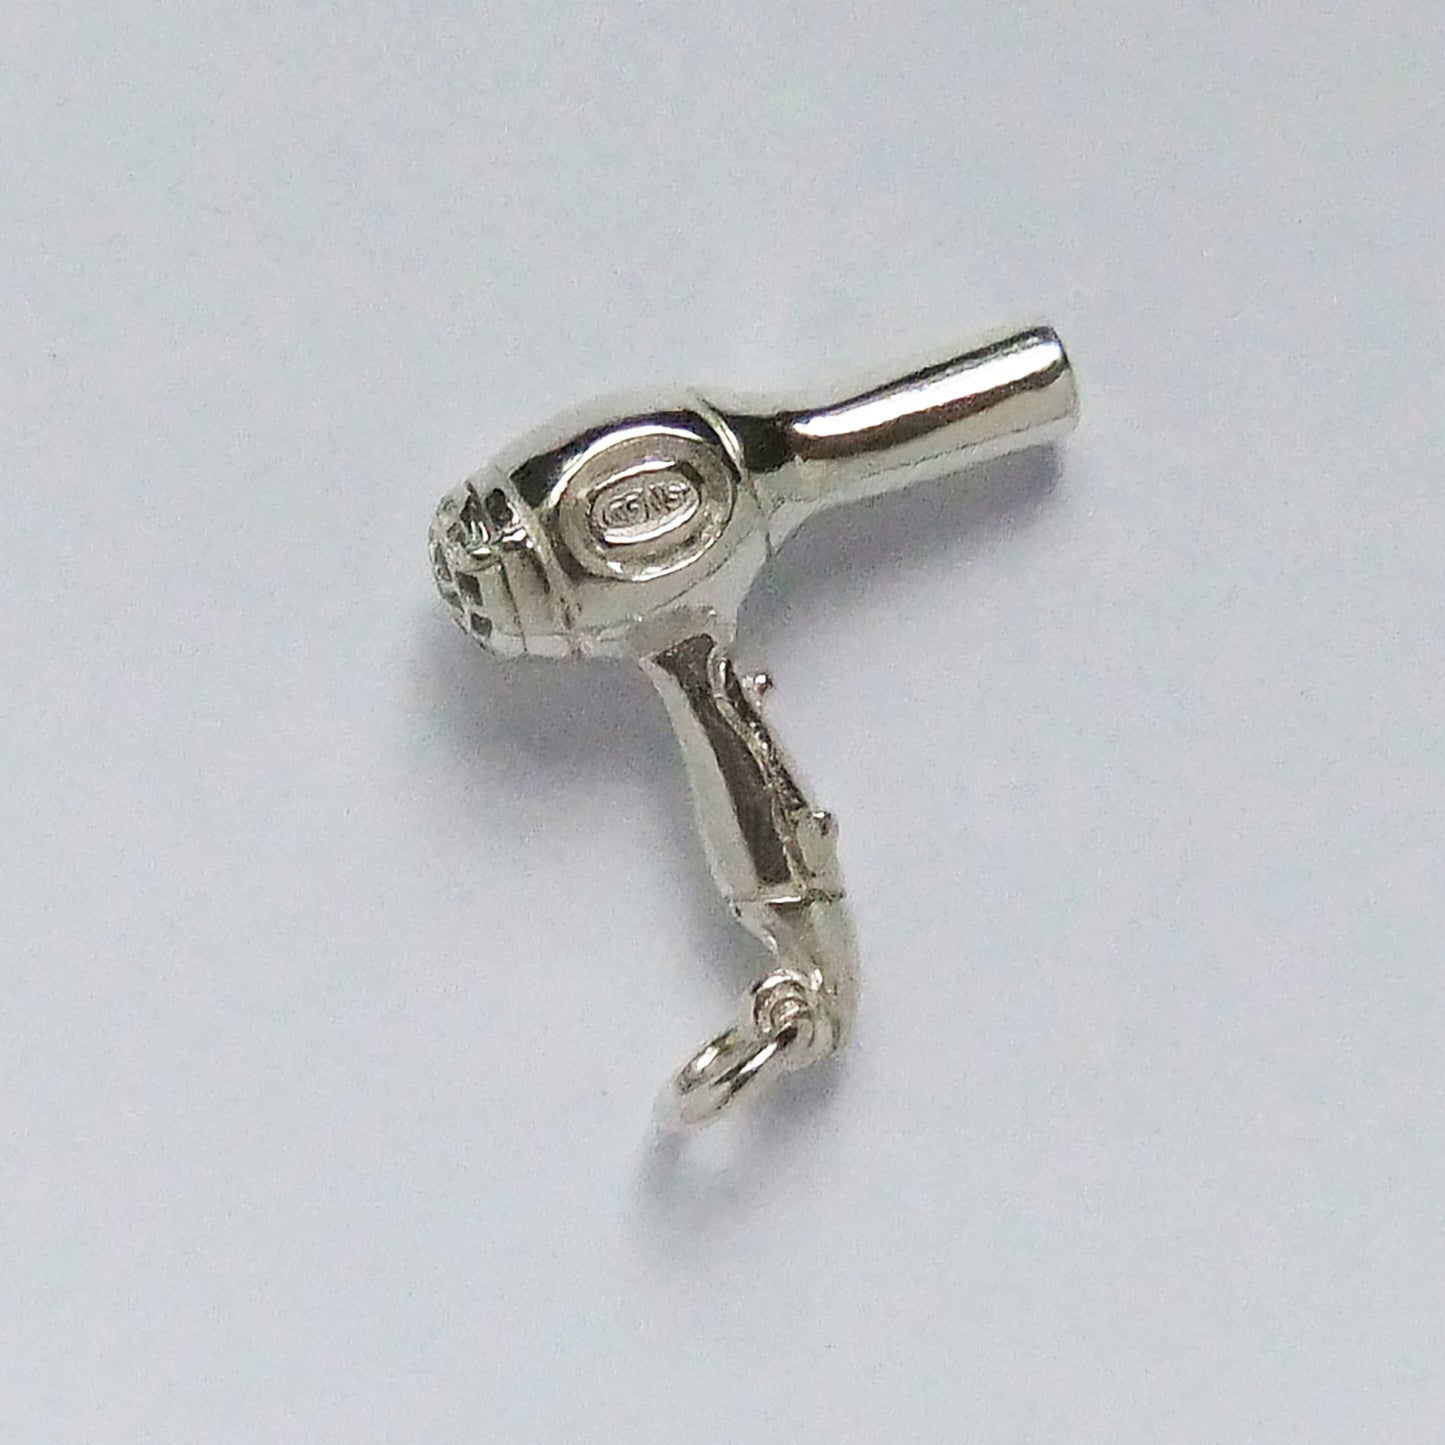 hairdryer charm — made to order